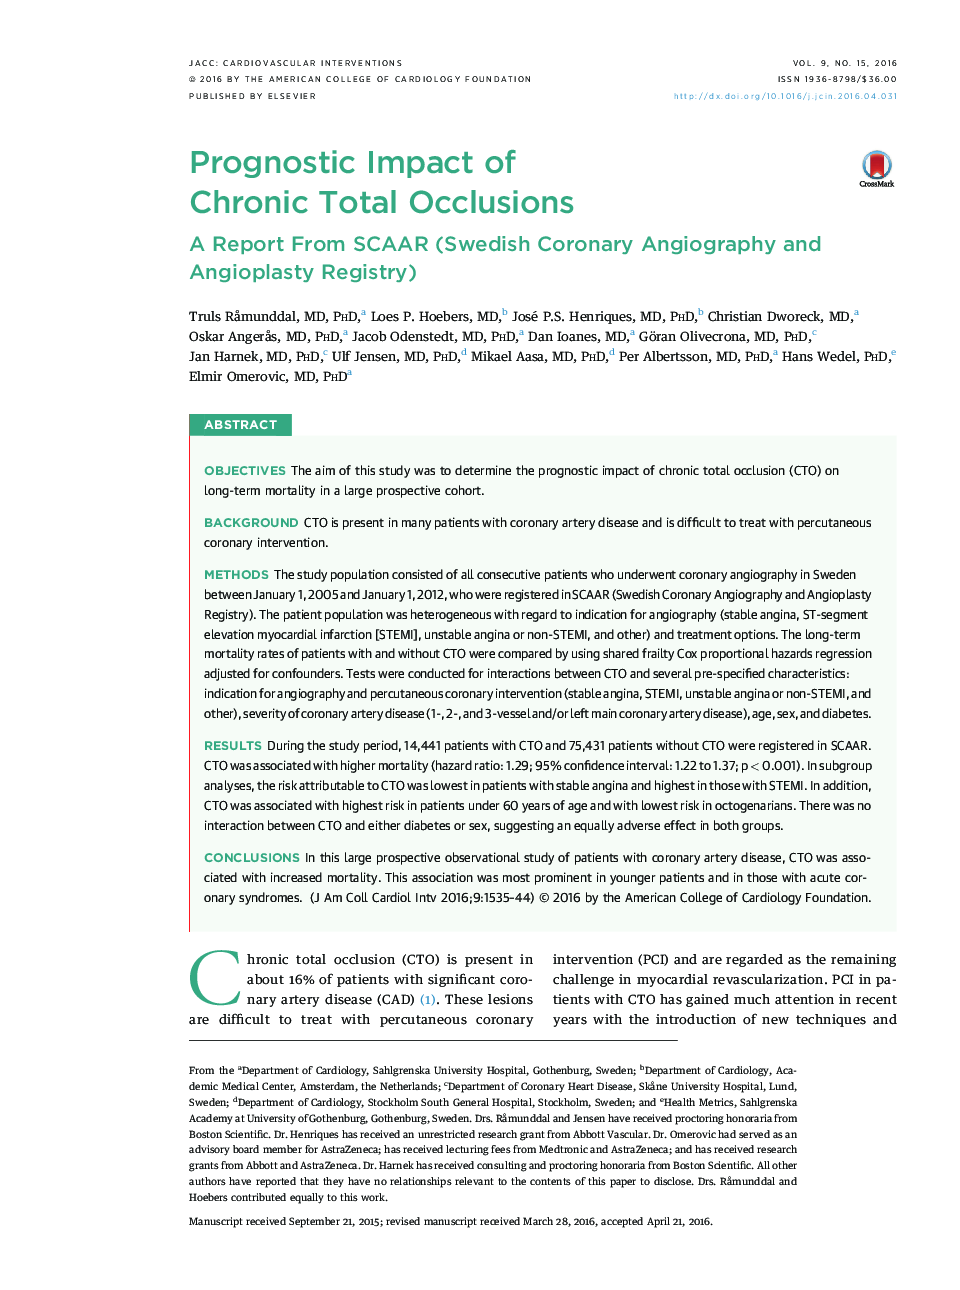 Prognostic Impact of Chronic Total Occlusions : A Report From SCAAR (Swedish Coronary Angiography and Angioplasty Registry)